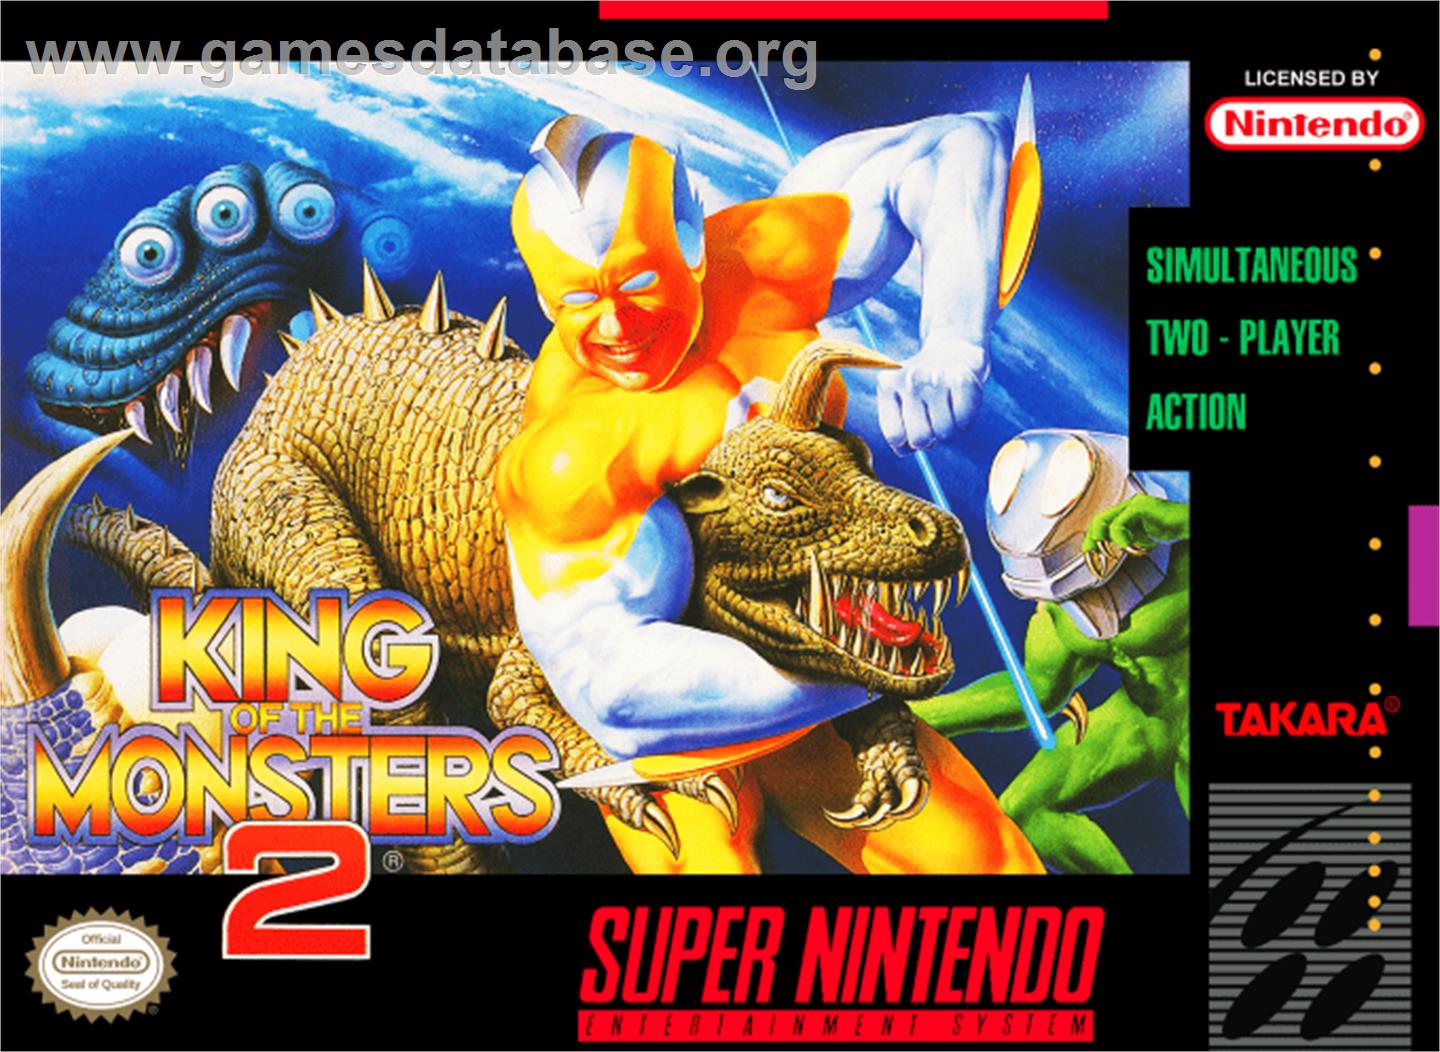 King of the Monsters 2: The Next Thing - Nintendo SNES - Artwork - Box